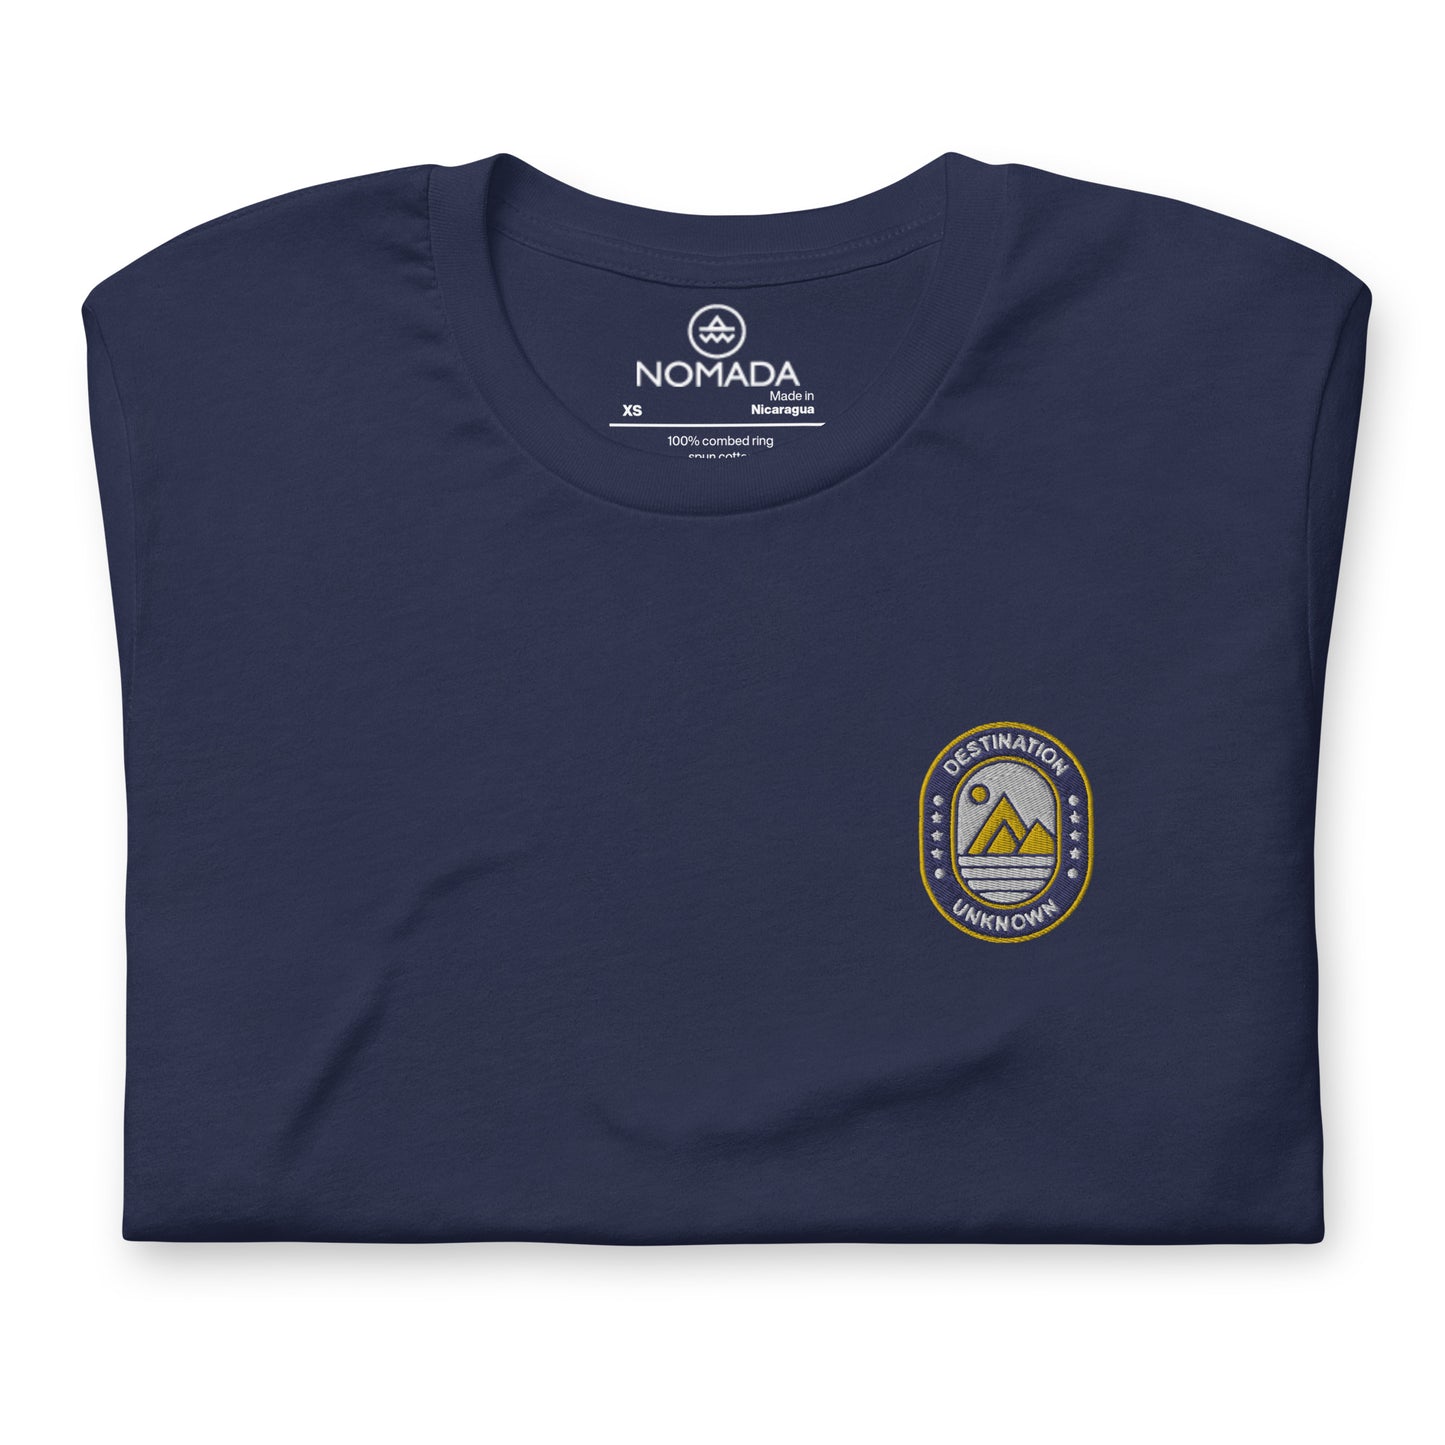 NOMADA Mountain & Sun Camper Patch embroidered T-shirt, Navy Blue color shirt